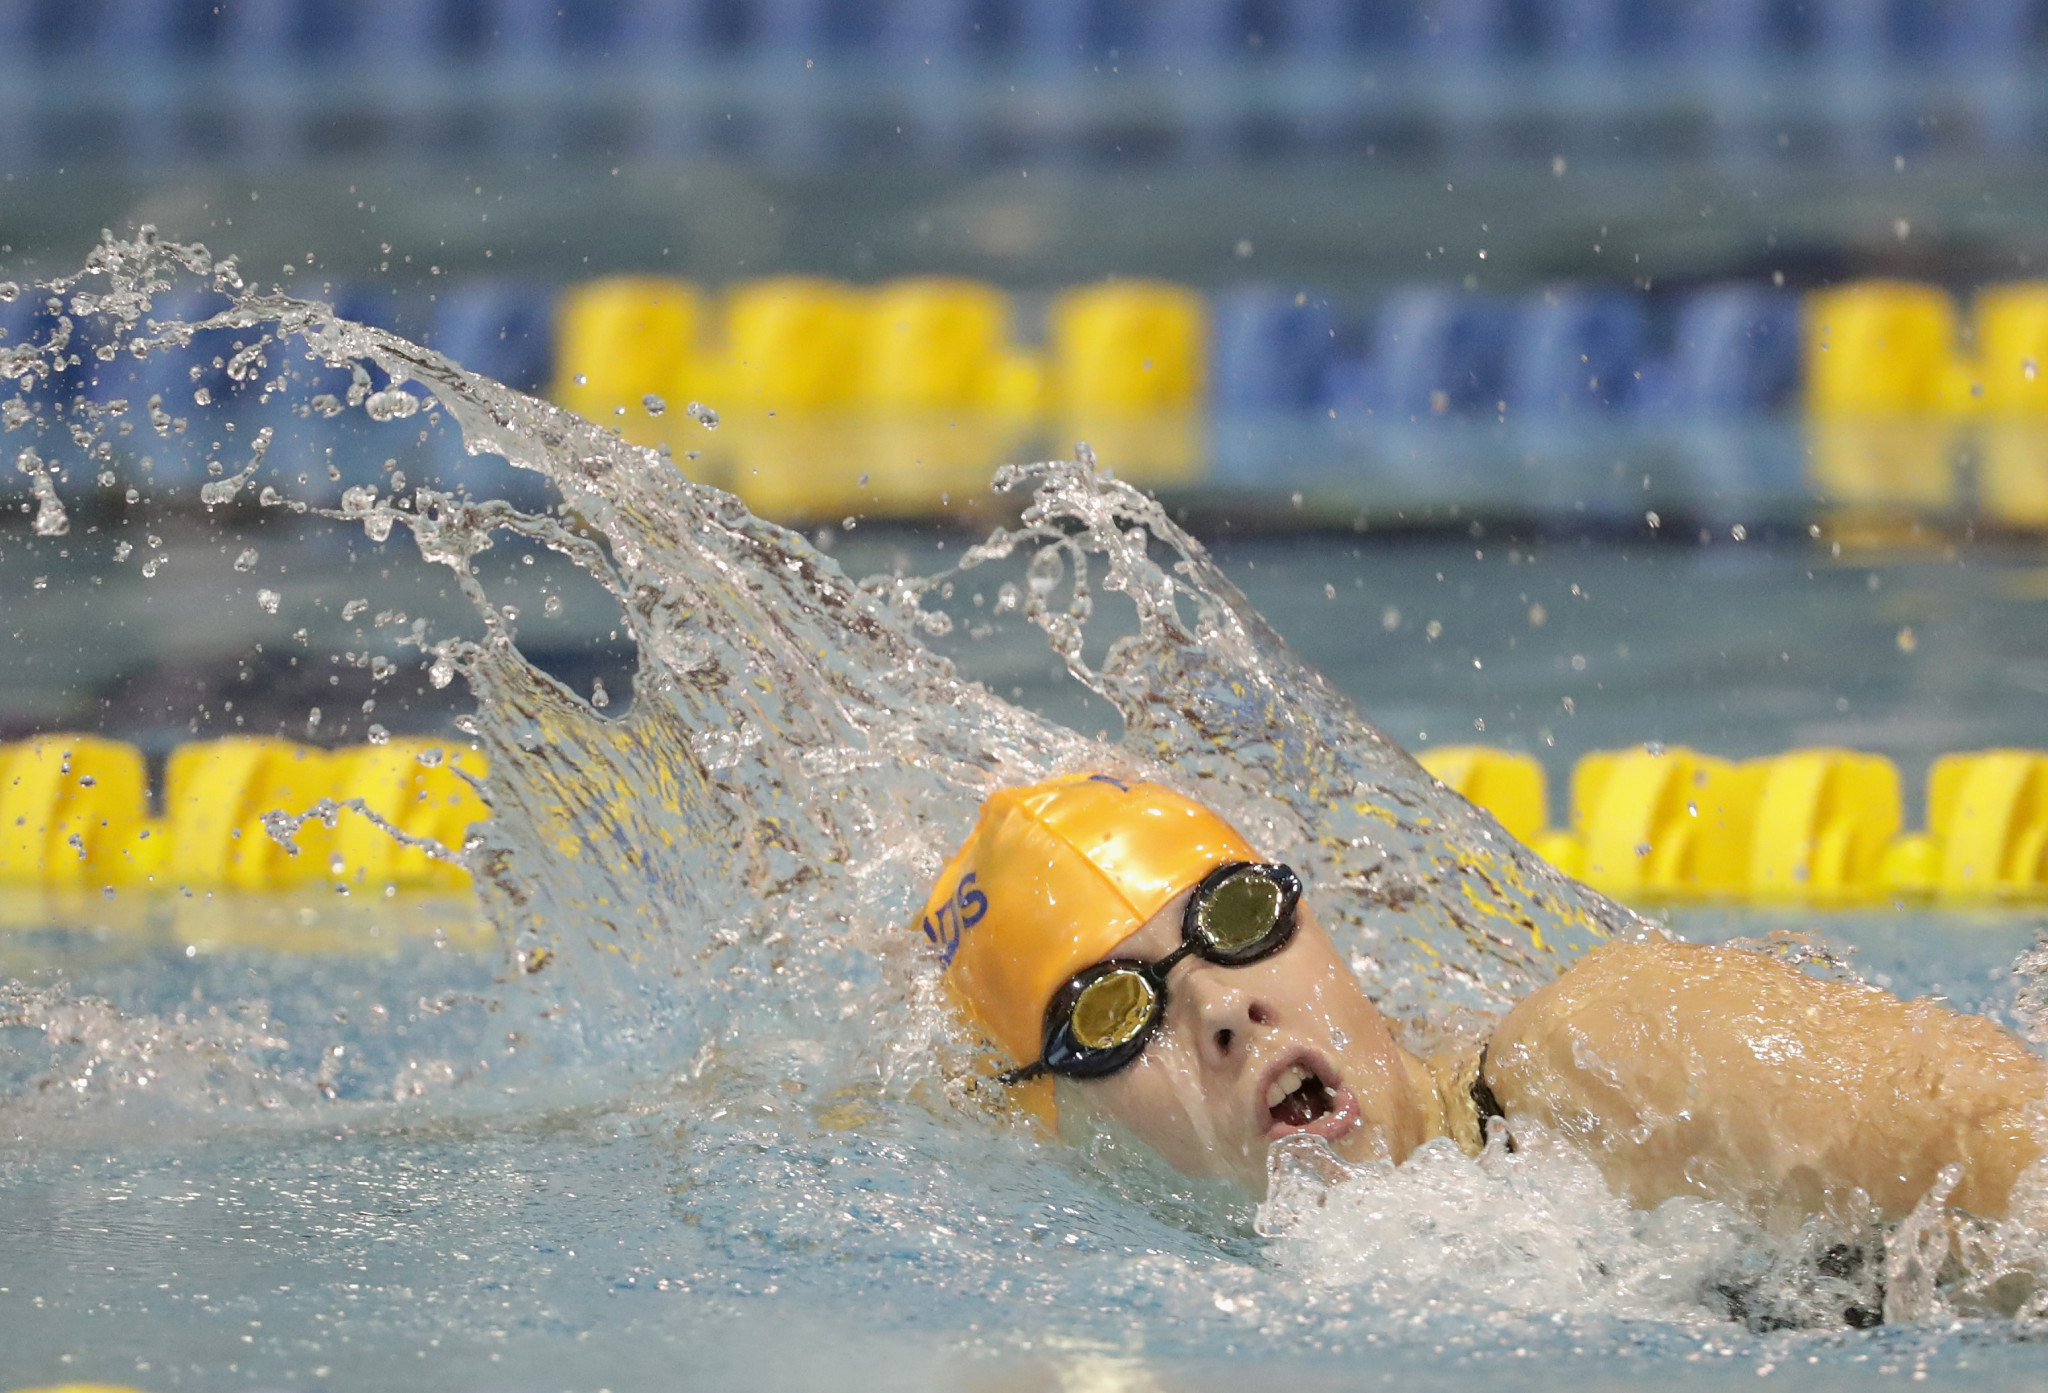 Gaffney sets world record to open World Para Swimming World Series event in Indianapolis